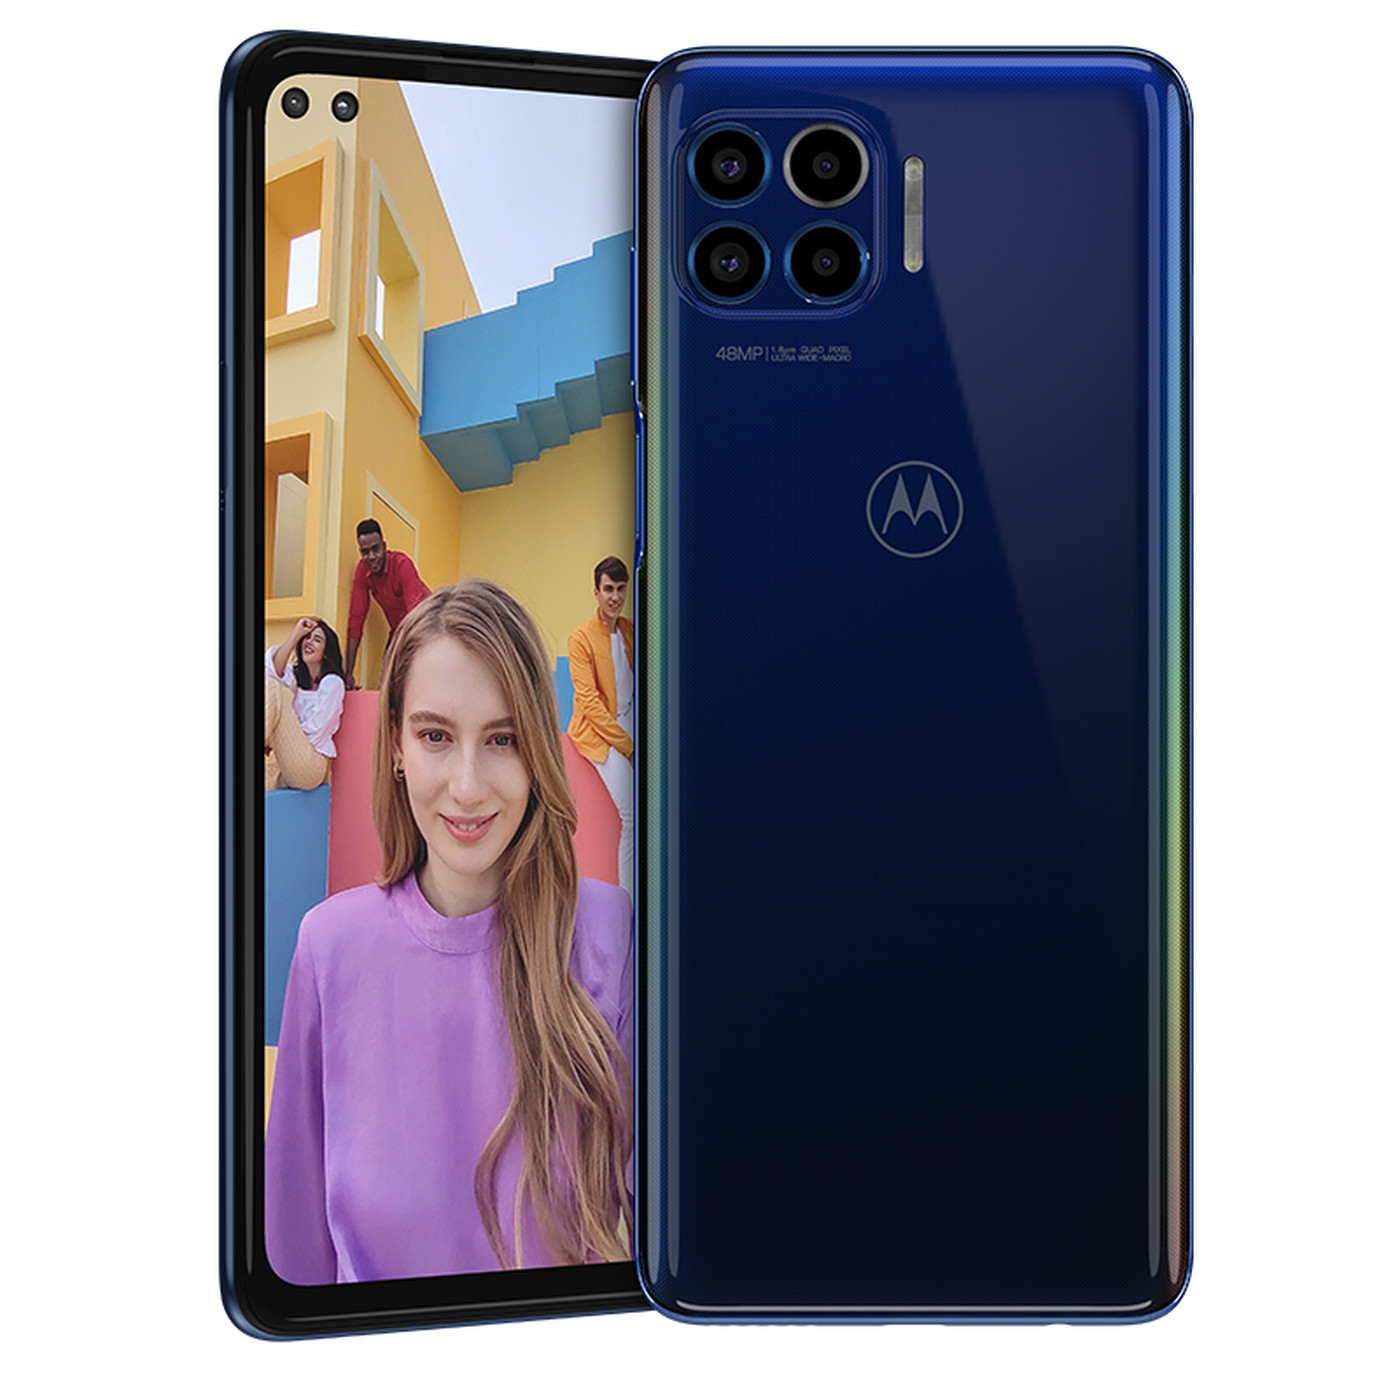 The Motorola One 5G has faster and a macro lens light for less than - The Verge